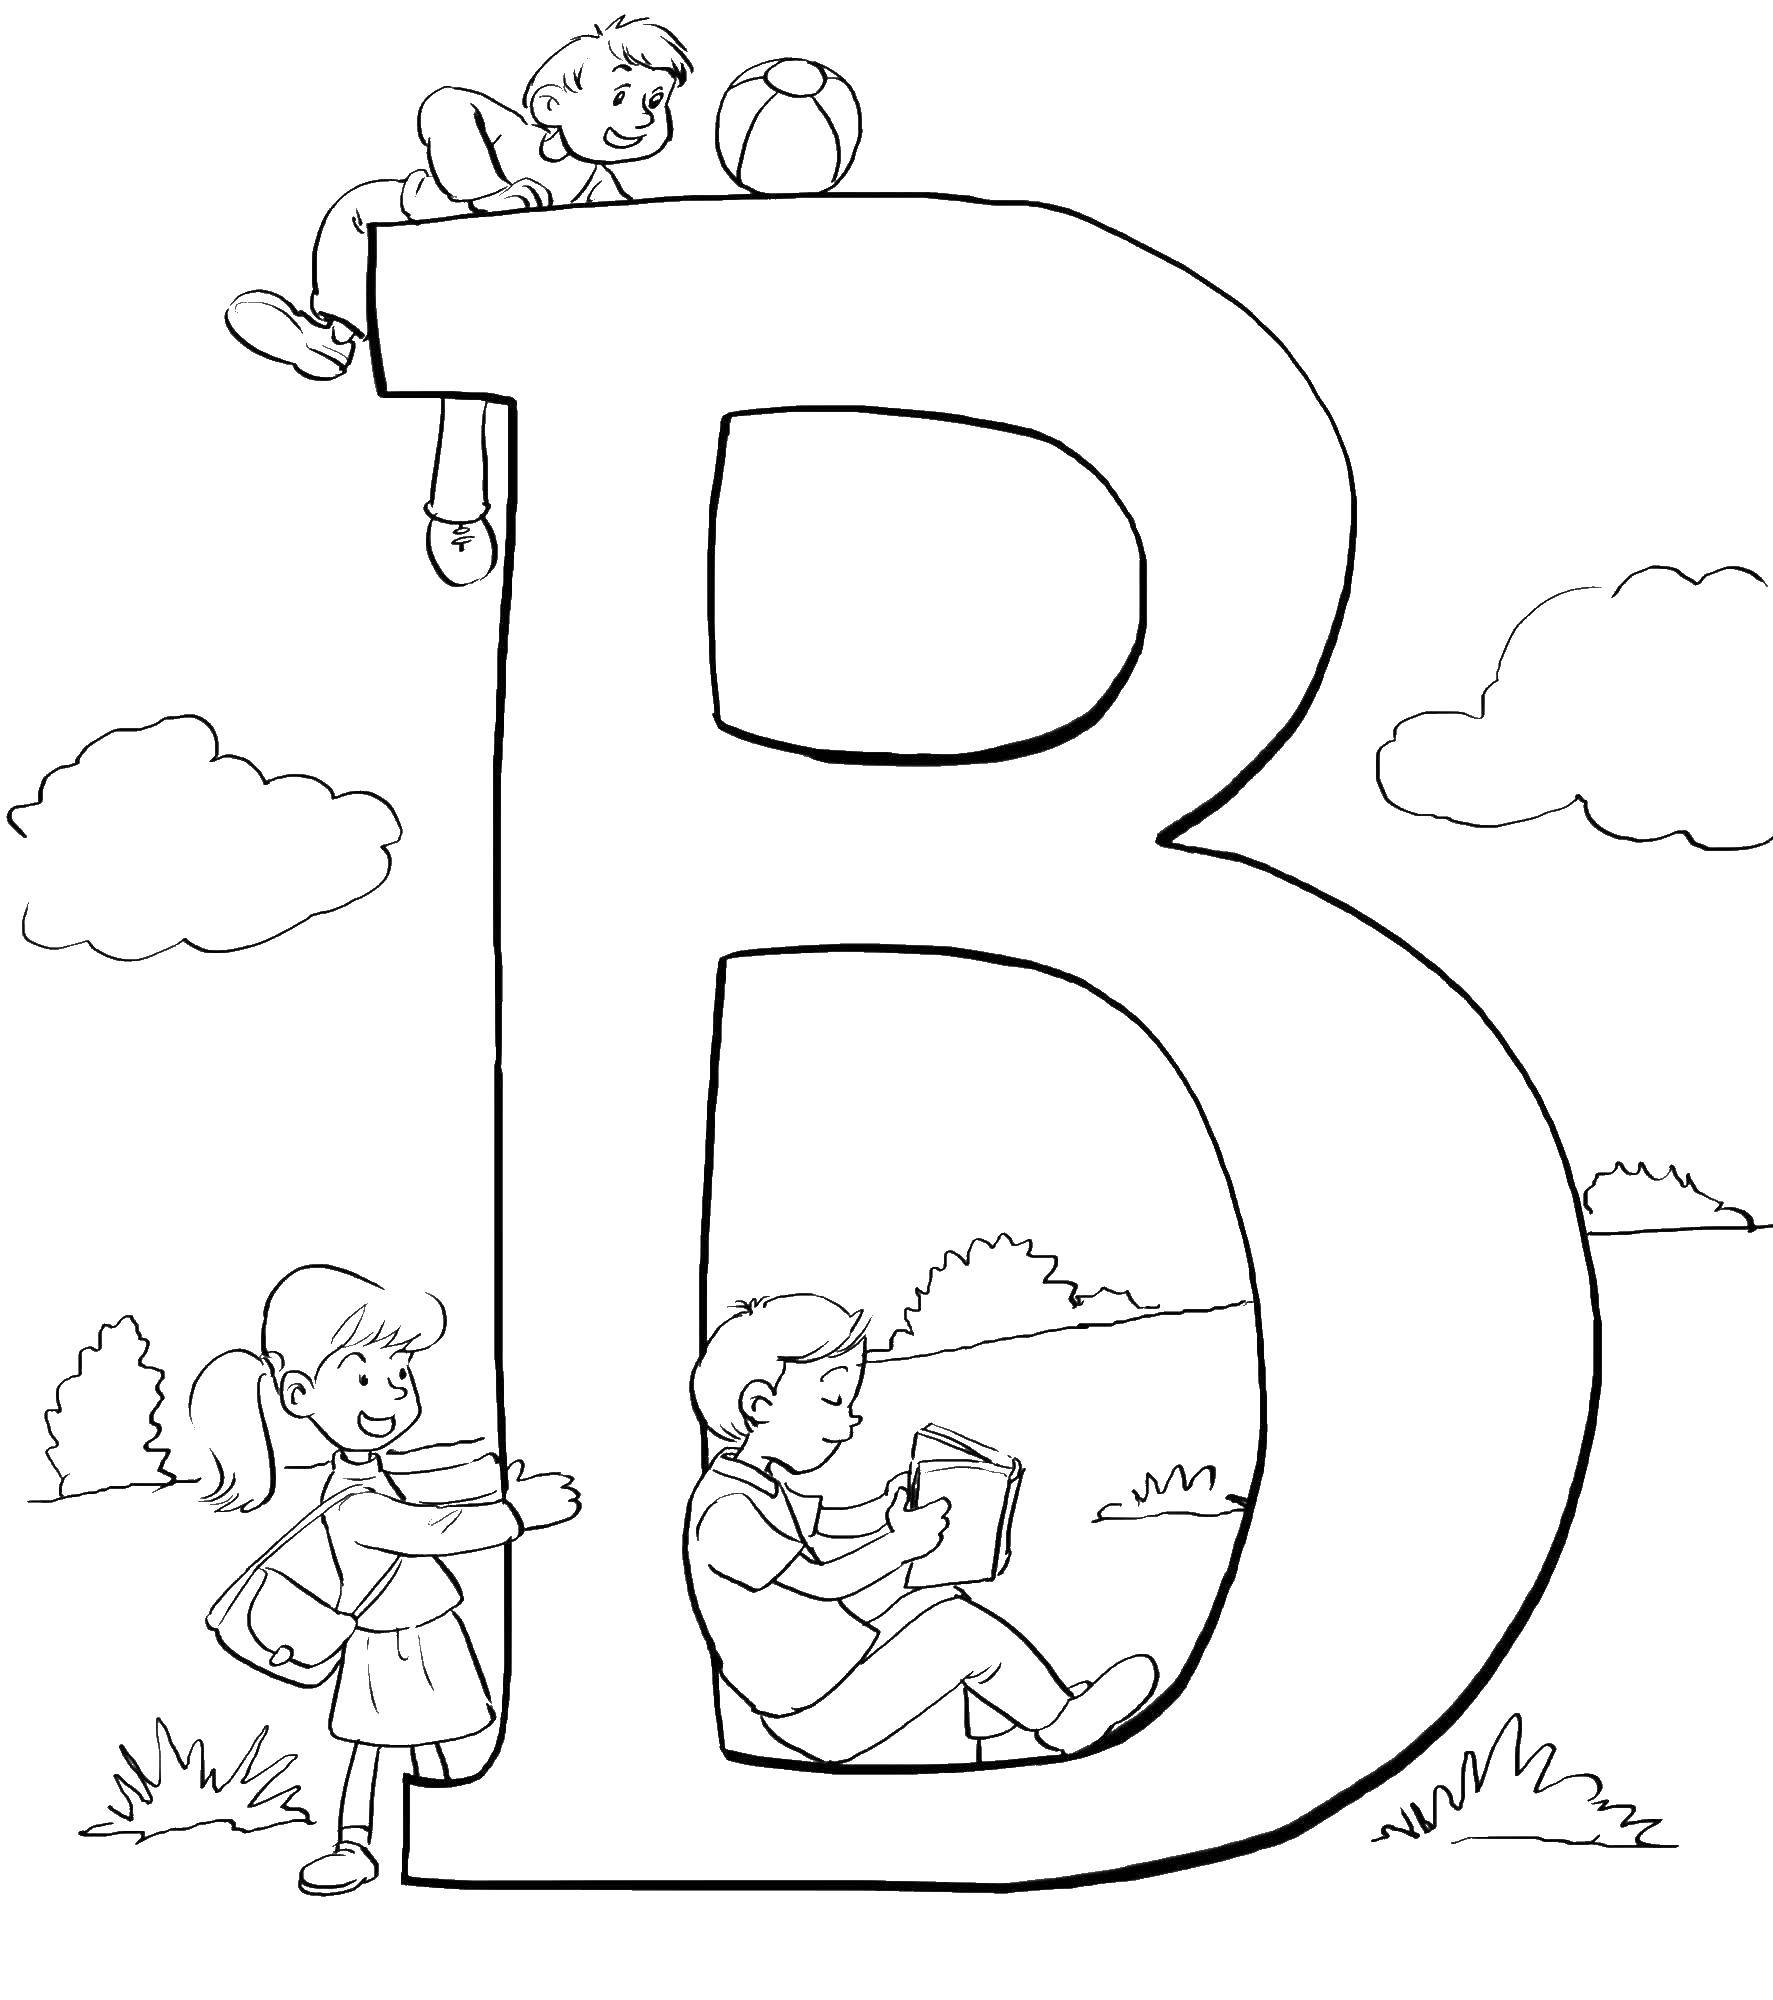 Coloring Children on the letter b. Category Letters. Tags:  letters, children, In.